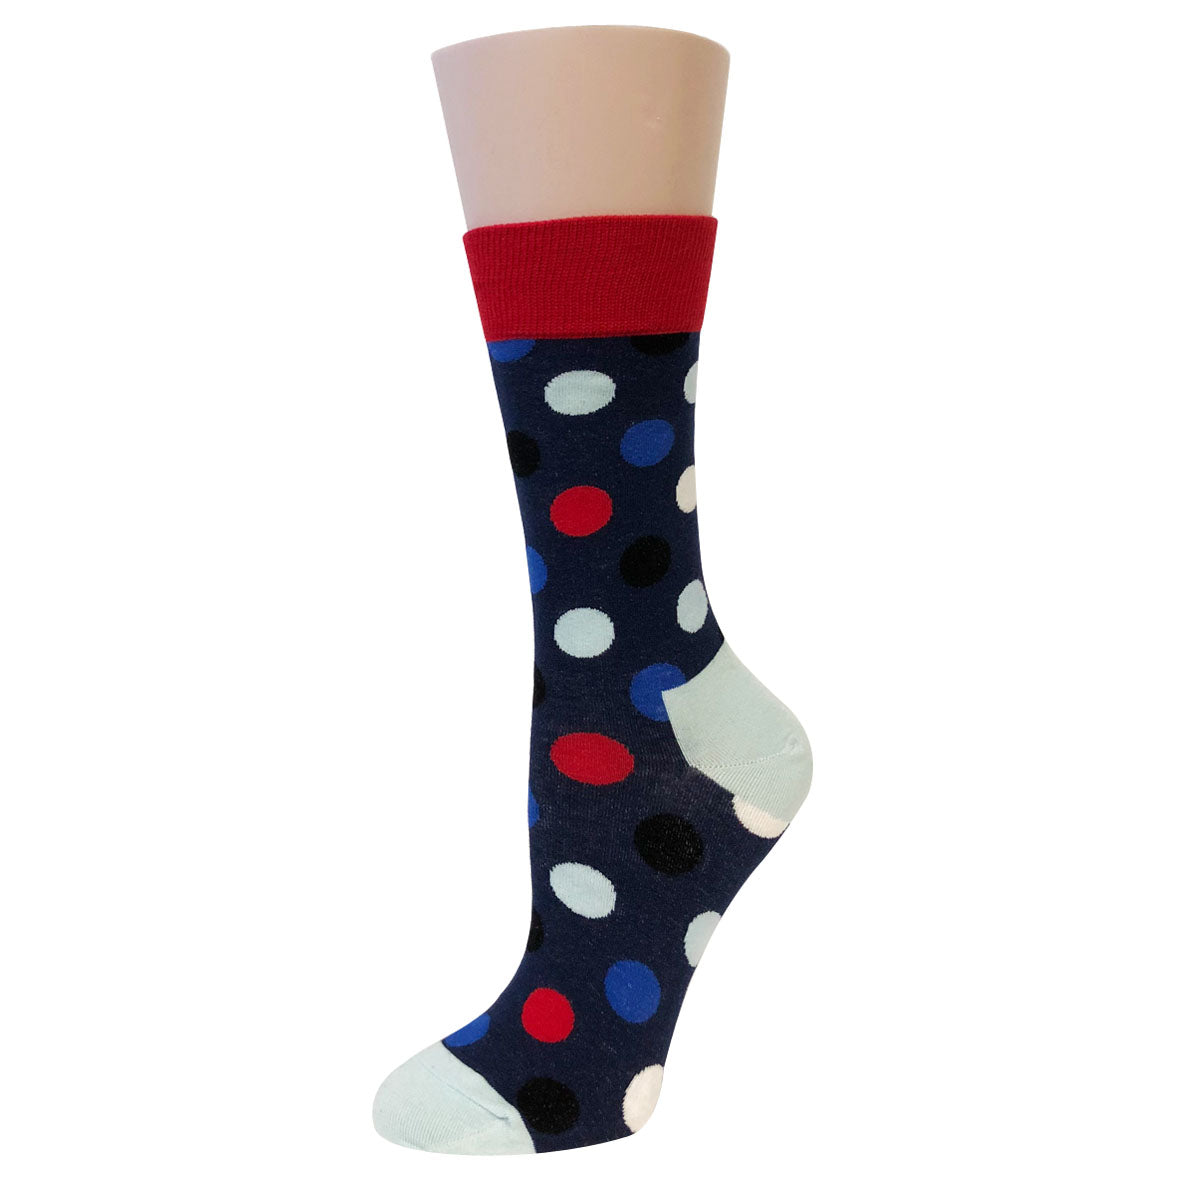 Wrapables Unisex Colorful Designs Trouser Socks (Set of 5)